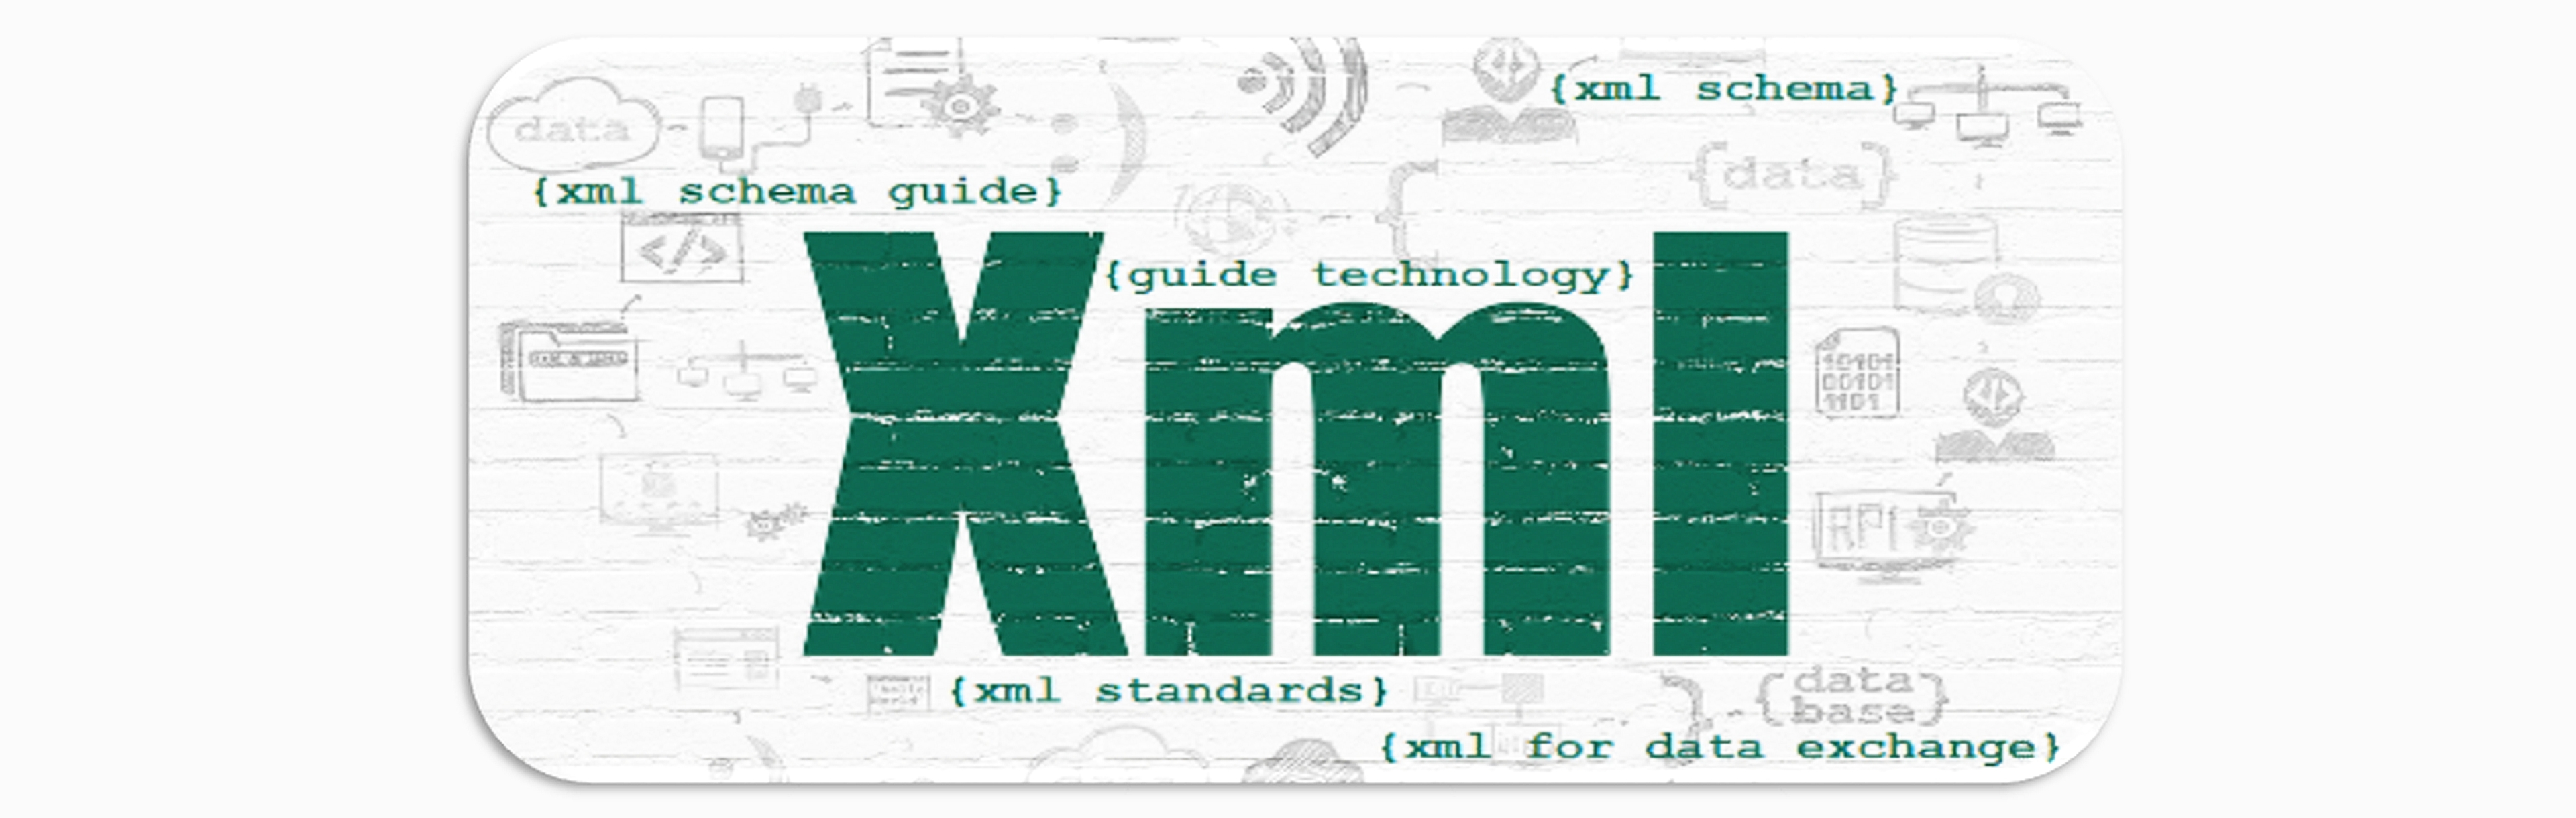 The image shows the abbreviation XML with large letters surrounded by various pale icons and texts in curly brackets on the subject of XML.